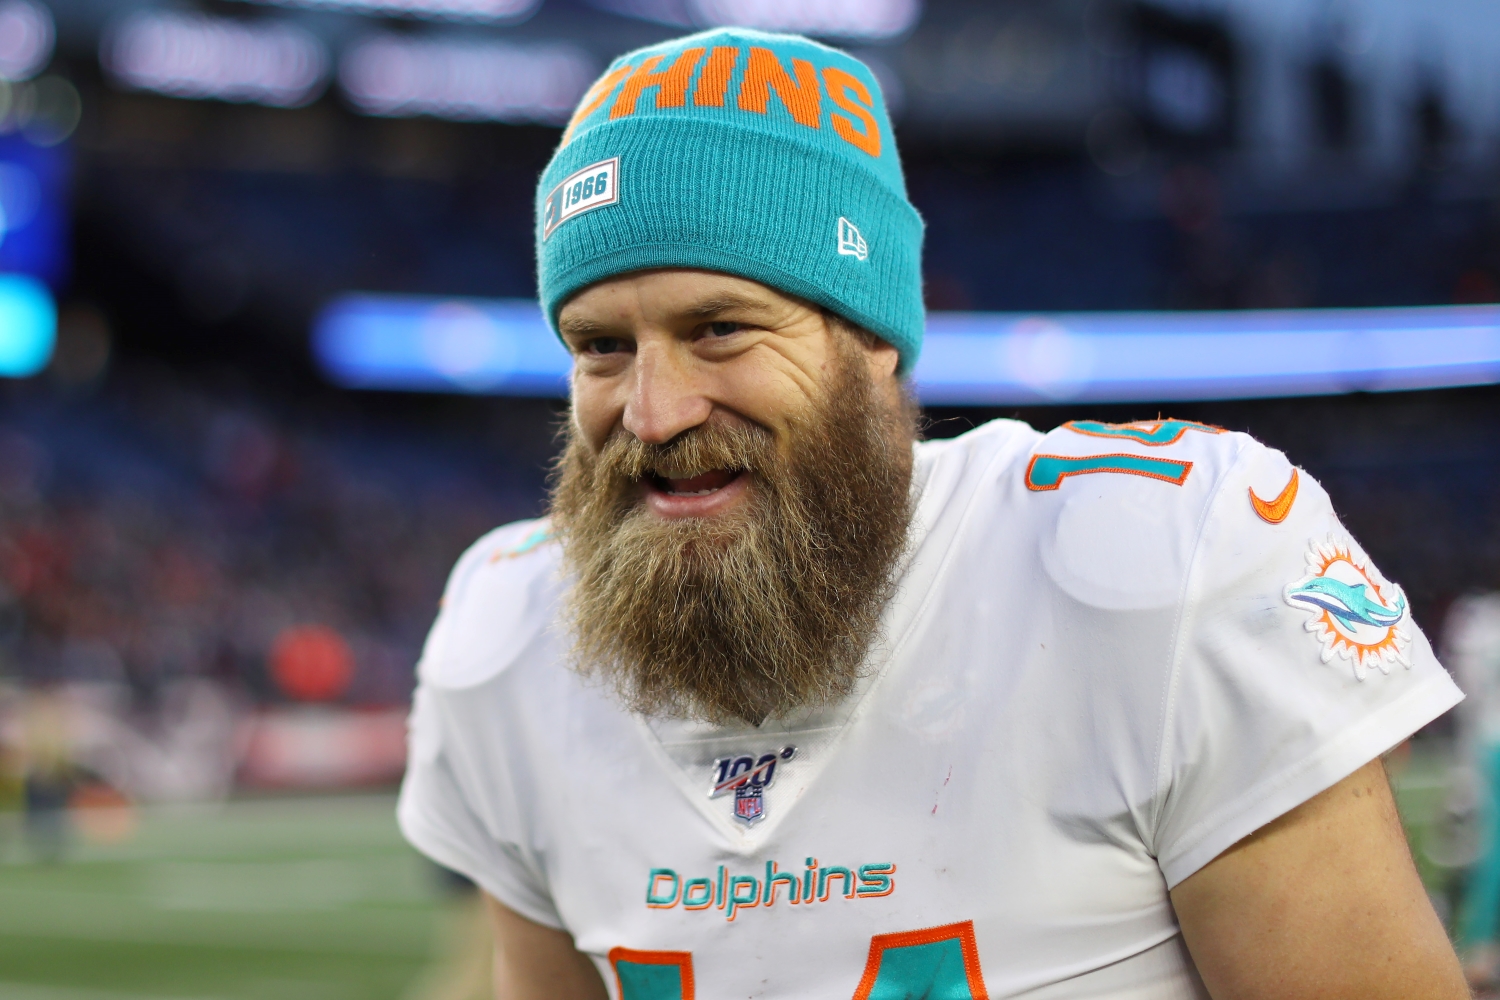 Ryan Fitzpatrick smiles as he leaves the field after the Miami Dolphins defeated the New England Patriots on Dec. 29, 2019.